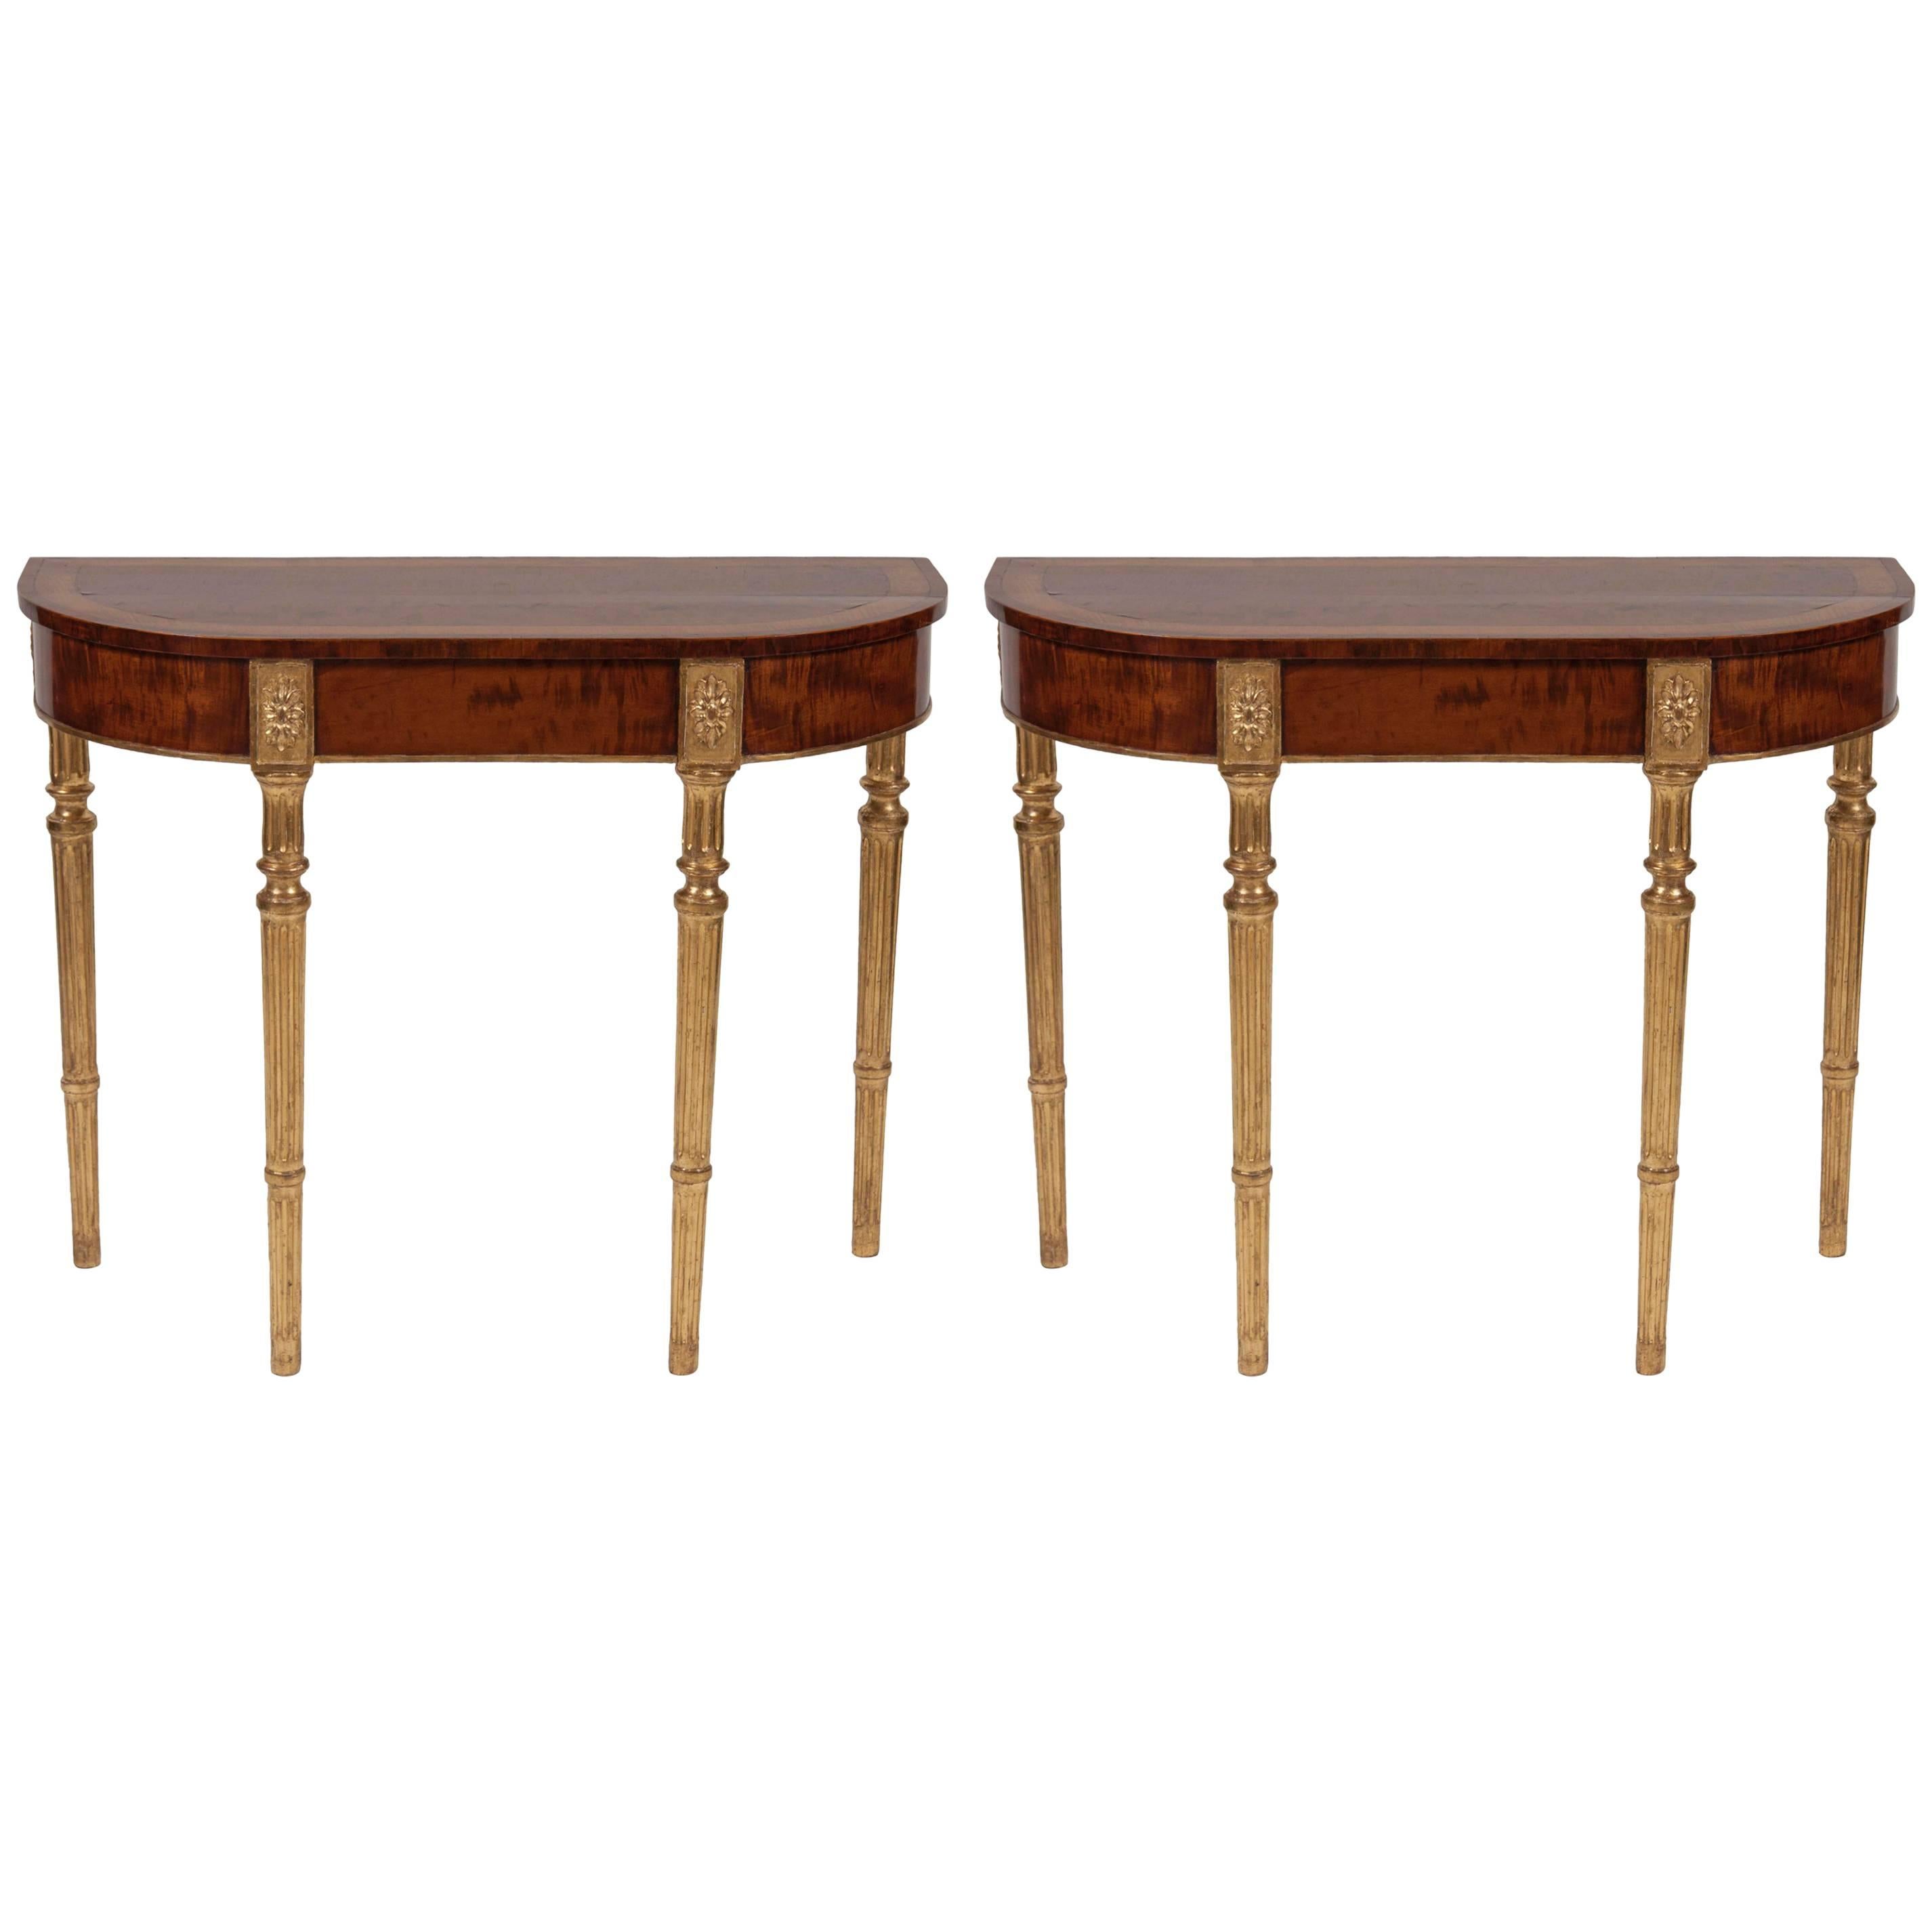 Pair of Matched George III Mahogany and Satinwood Parcel-Gilt Console Tables